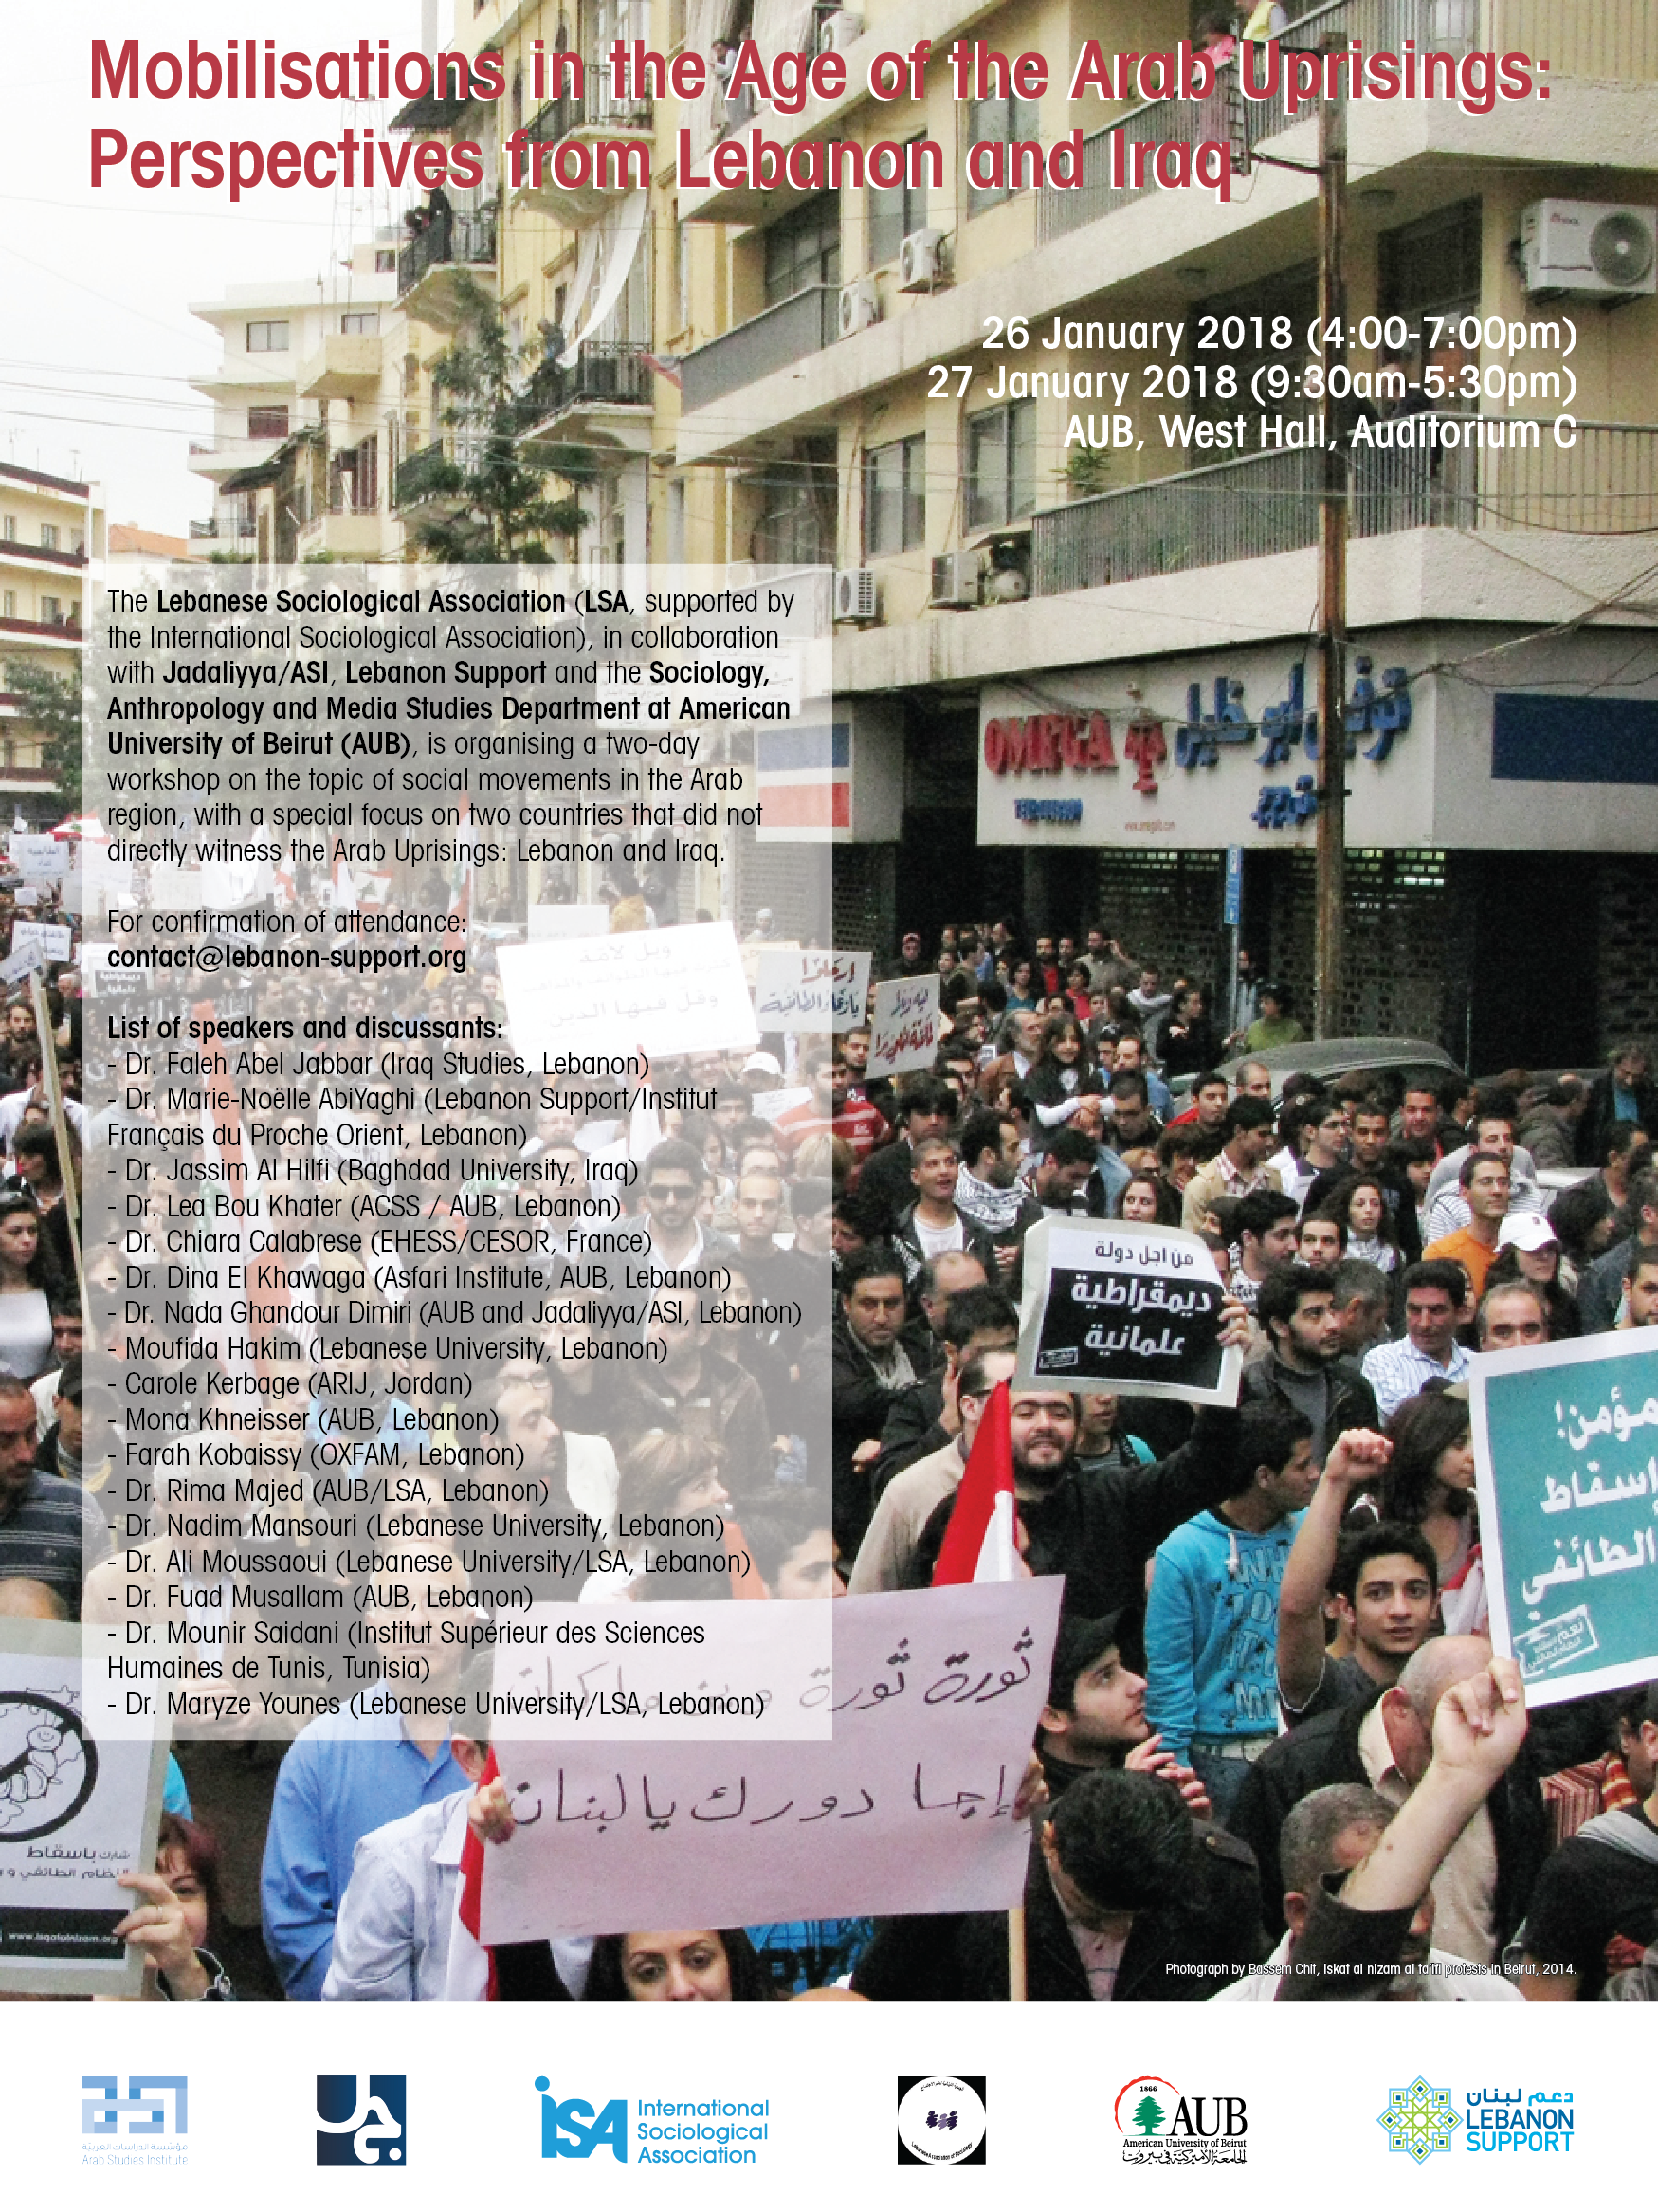 Mobilisations in the Age of the Arab Uprisings: Perspectives from Lebanon and Iraq event poster